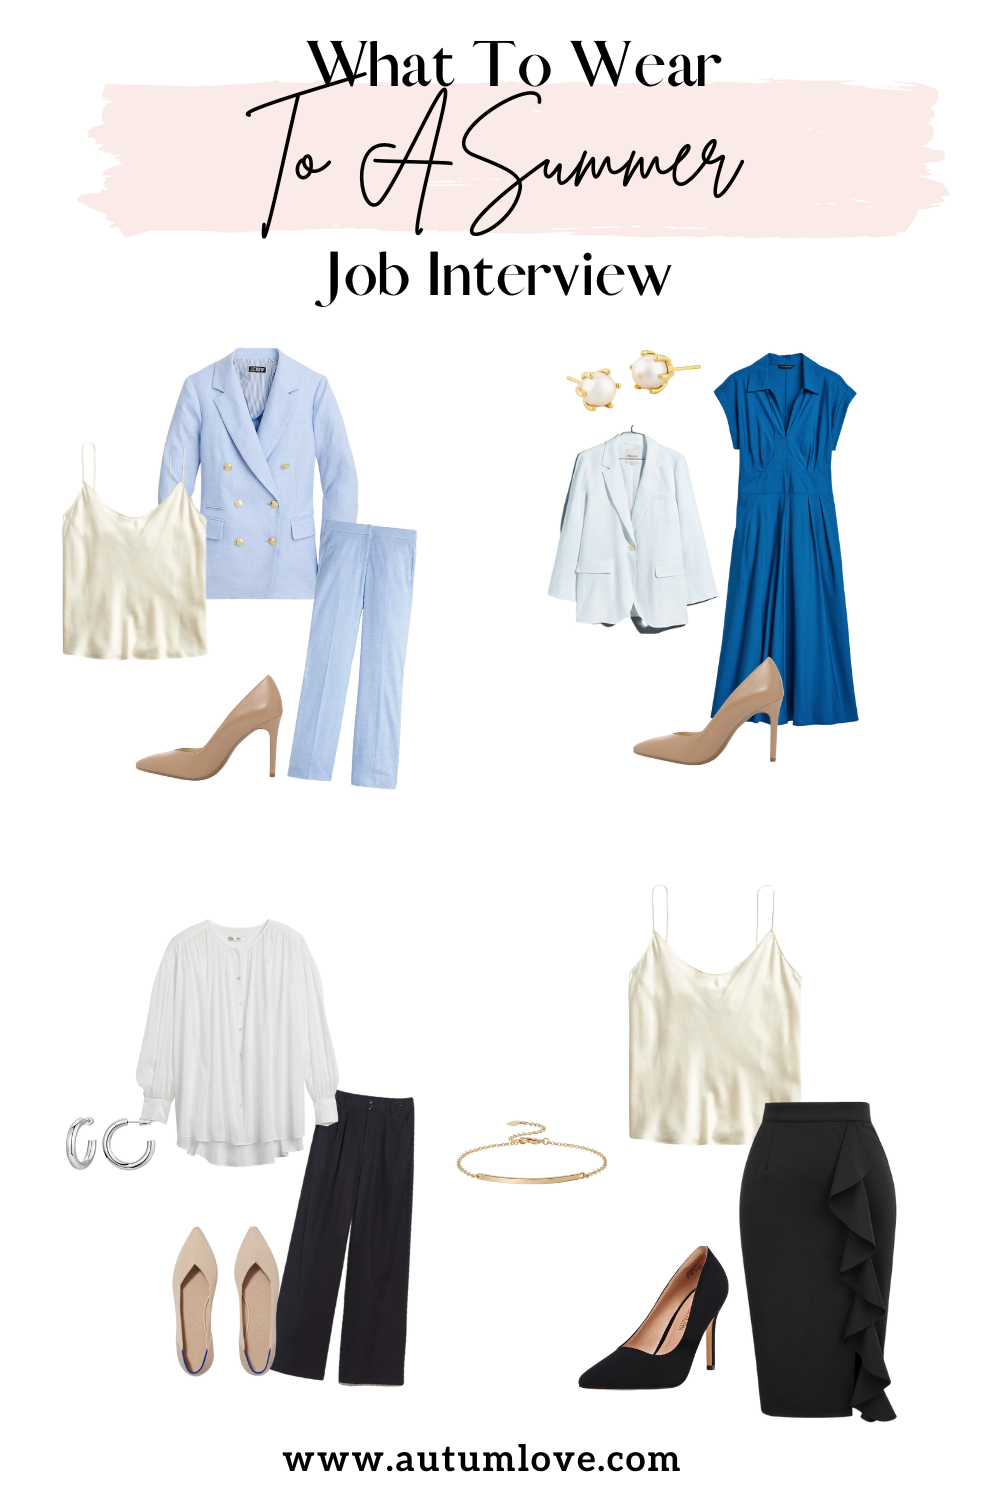 Ace Your Interview With These 5 Summer Outfit Ideas | Women's Job ...